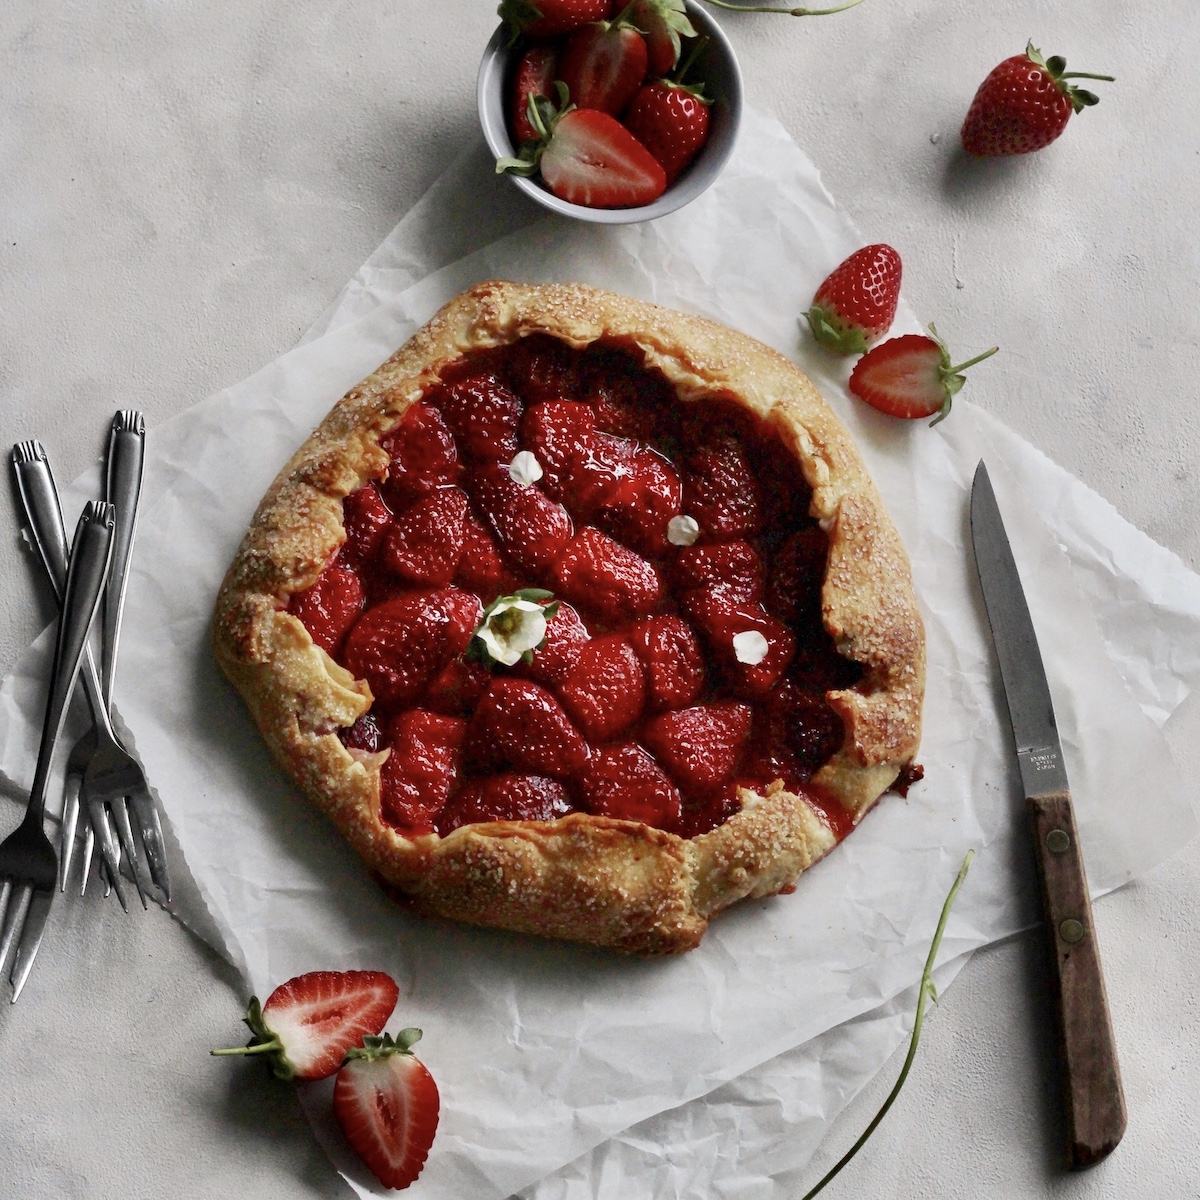 Top down shot of a baked strawberry galette.